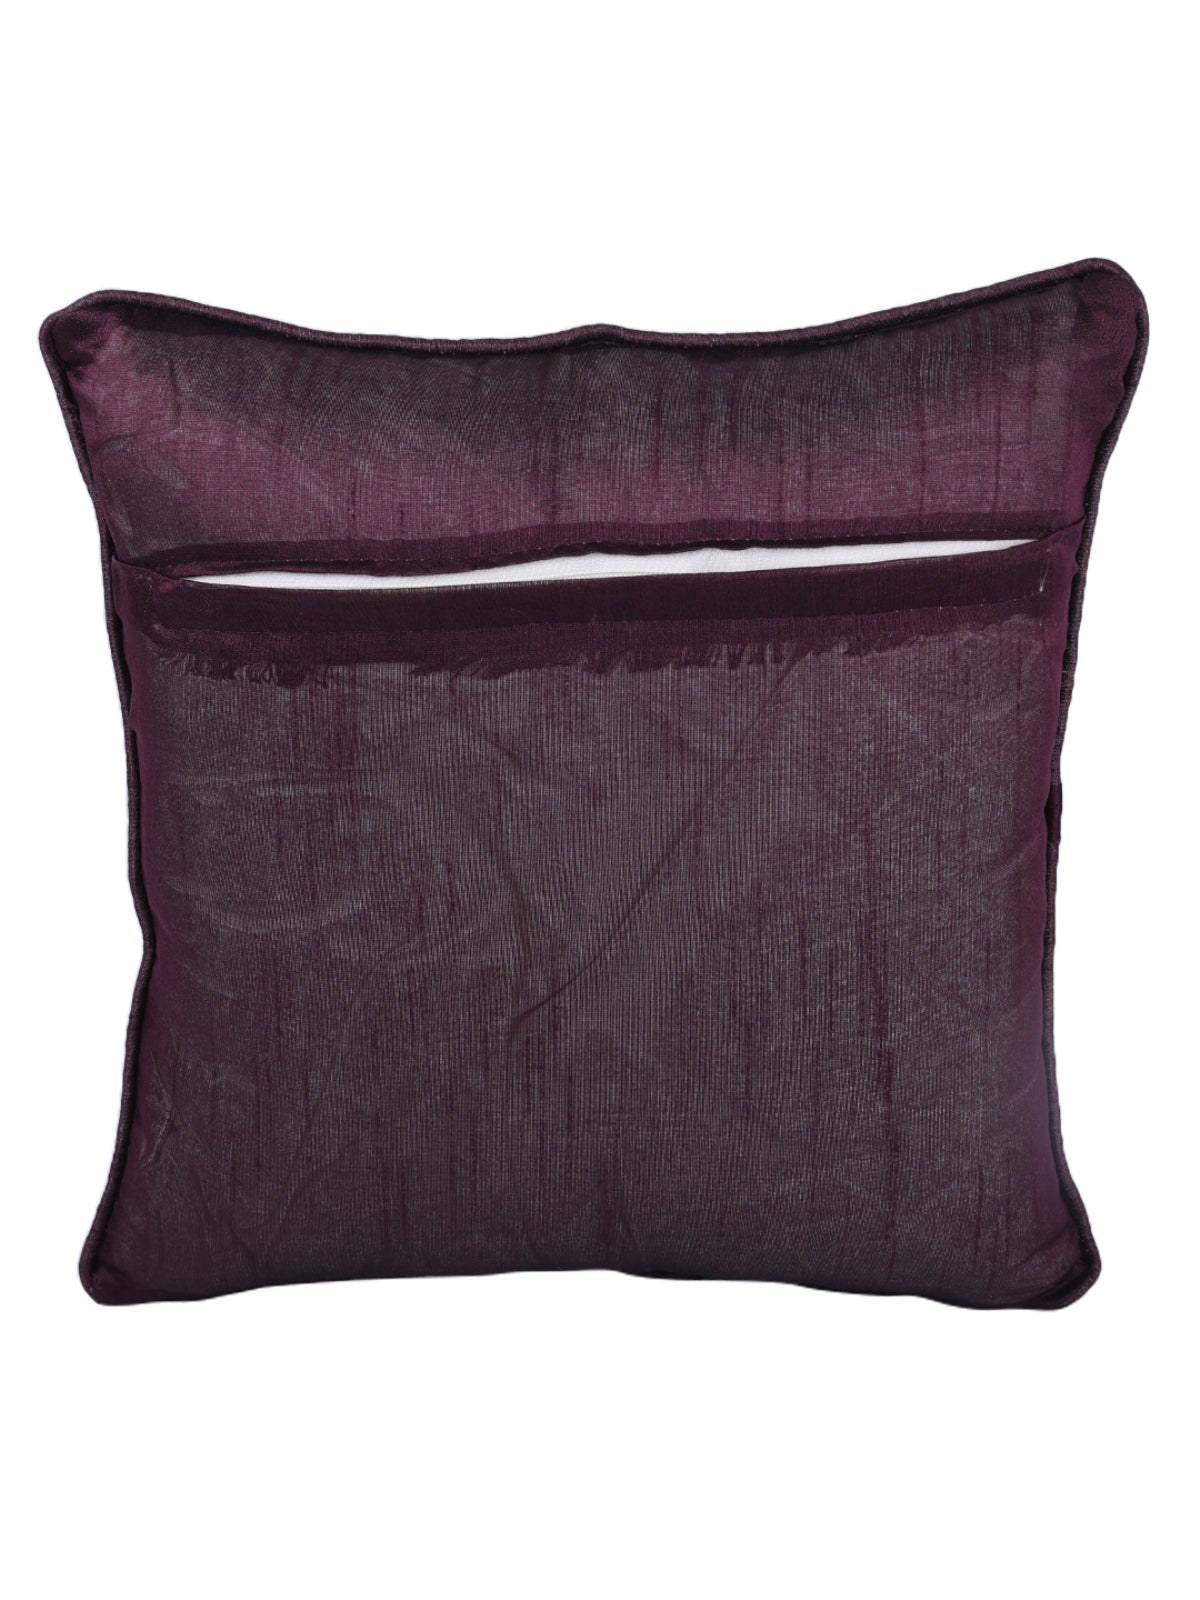 Purple & Silver Set of 5 Jacquard 16 Inch x 16 Inch Cushion Covers